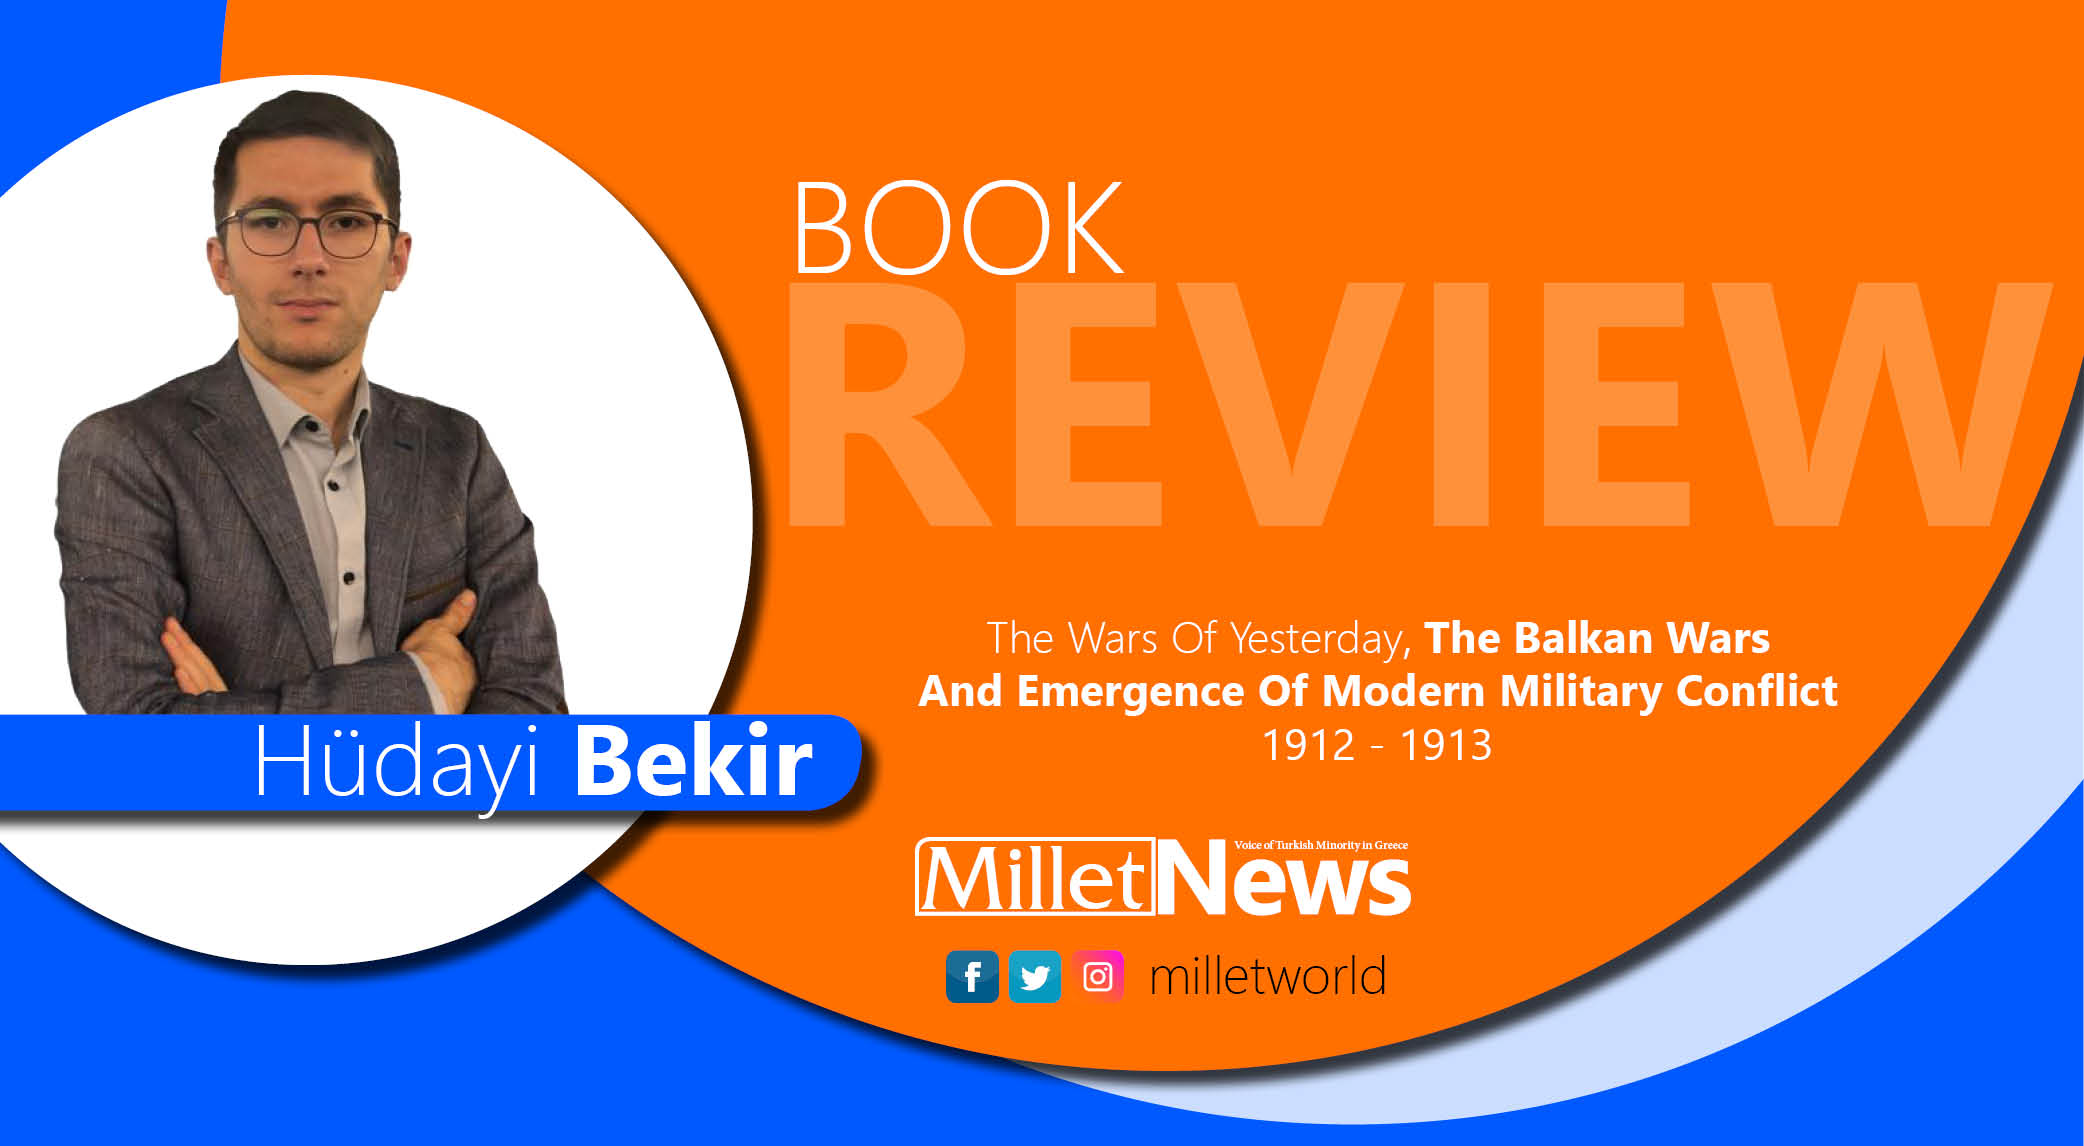 Book Review: The Wars Of Yesterday, The Balkan Wars And Emergence Of Modern Military Conflict 1912 - 1913